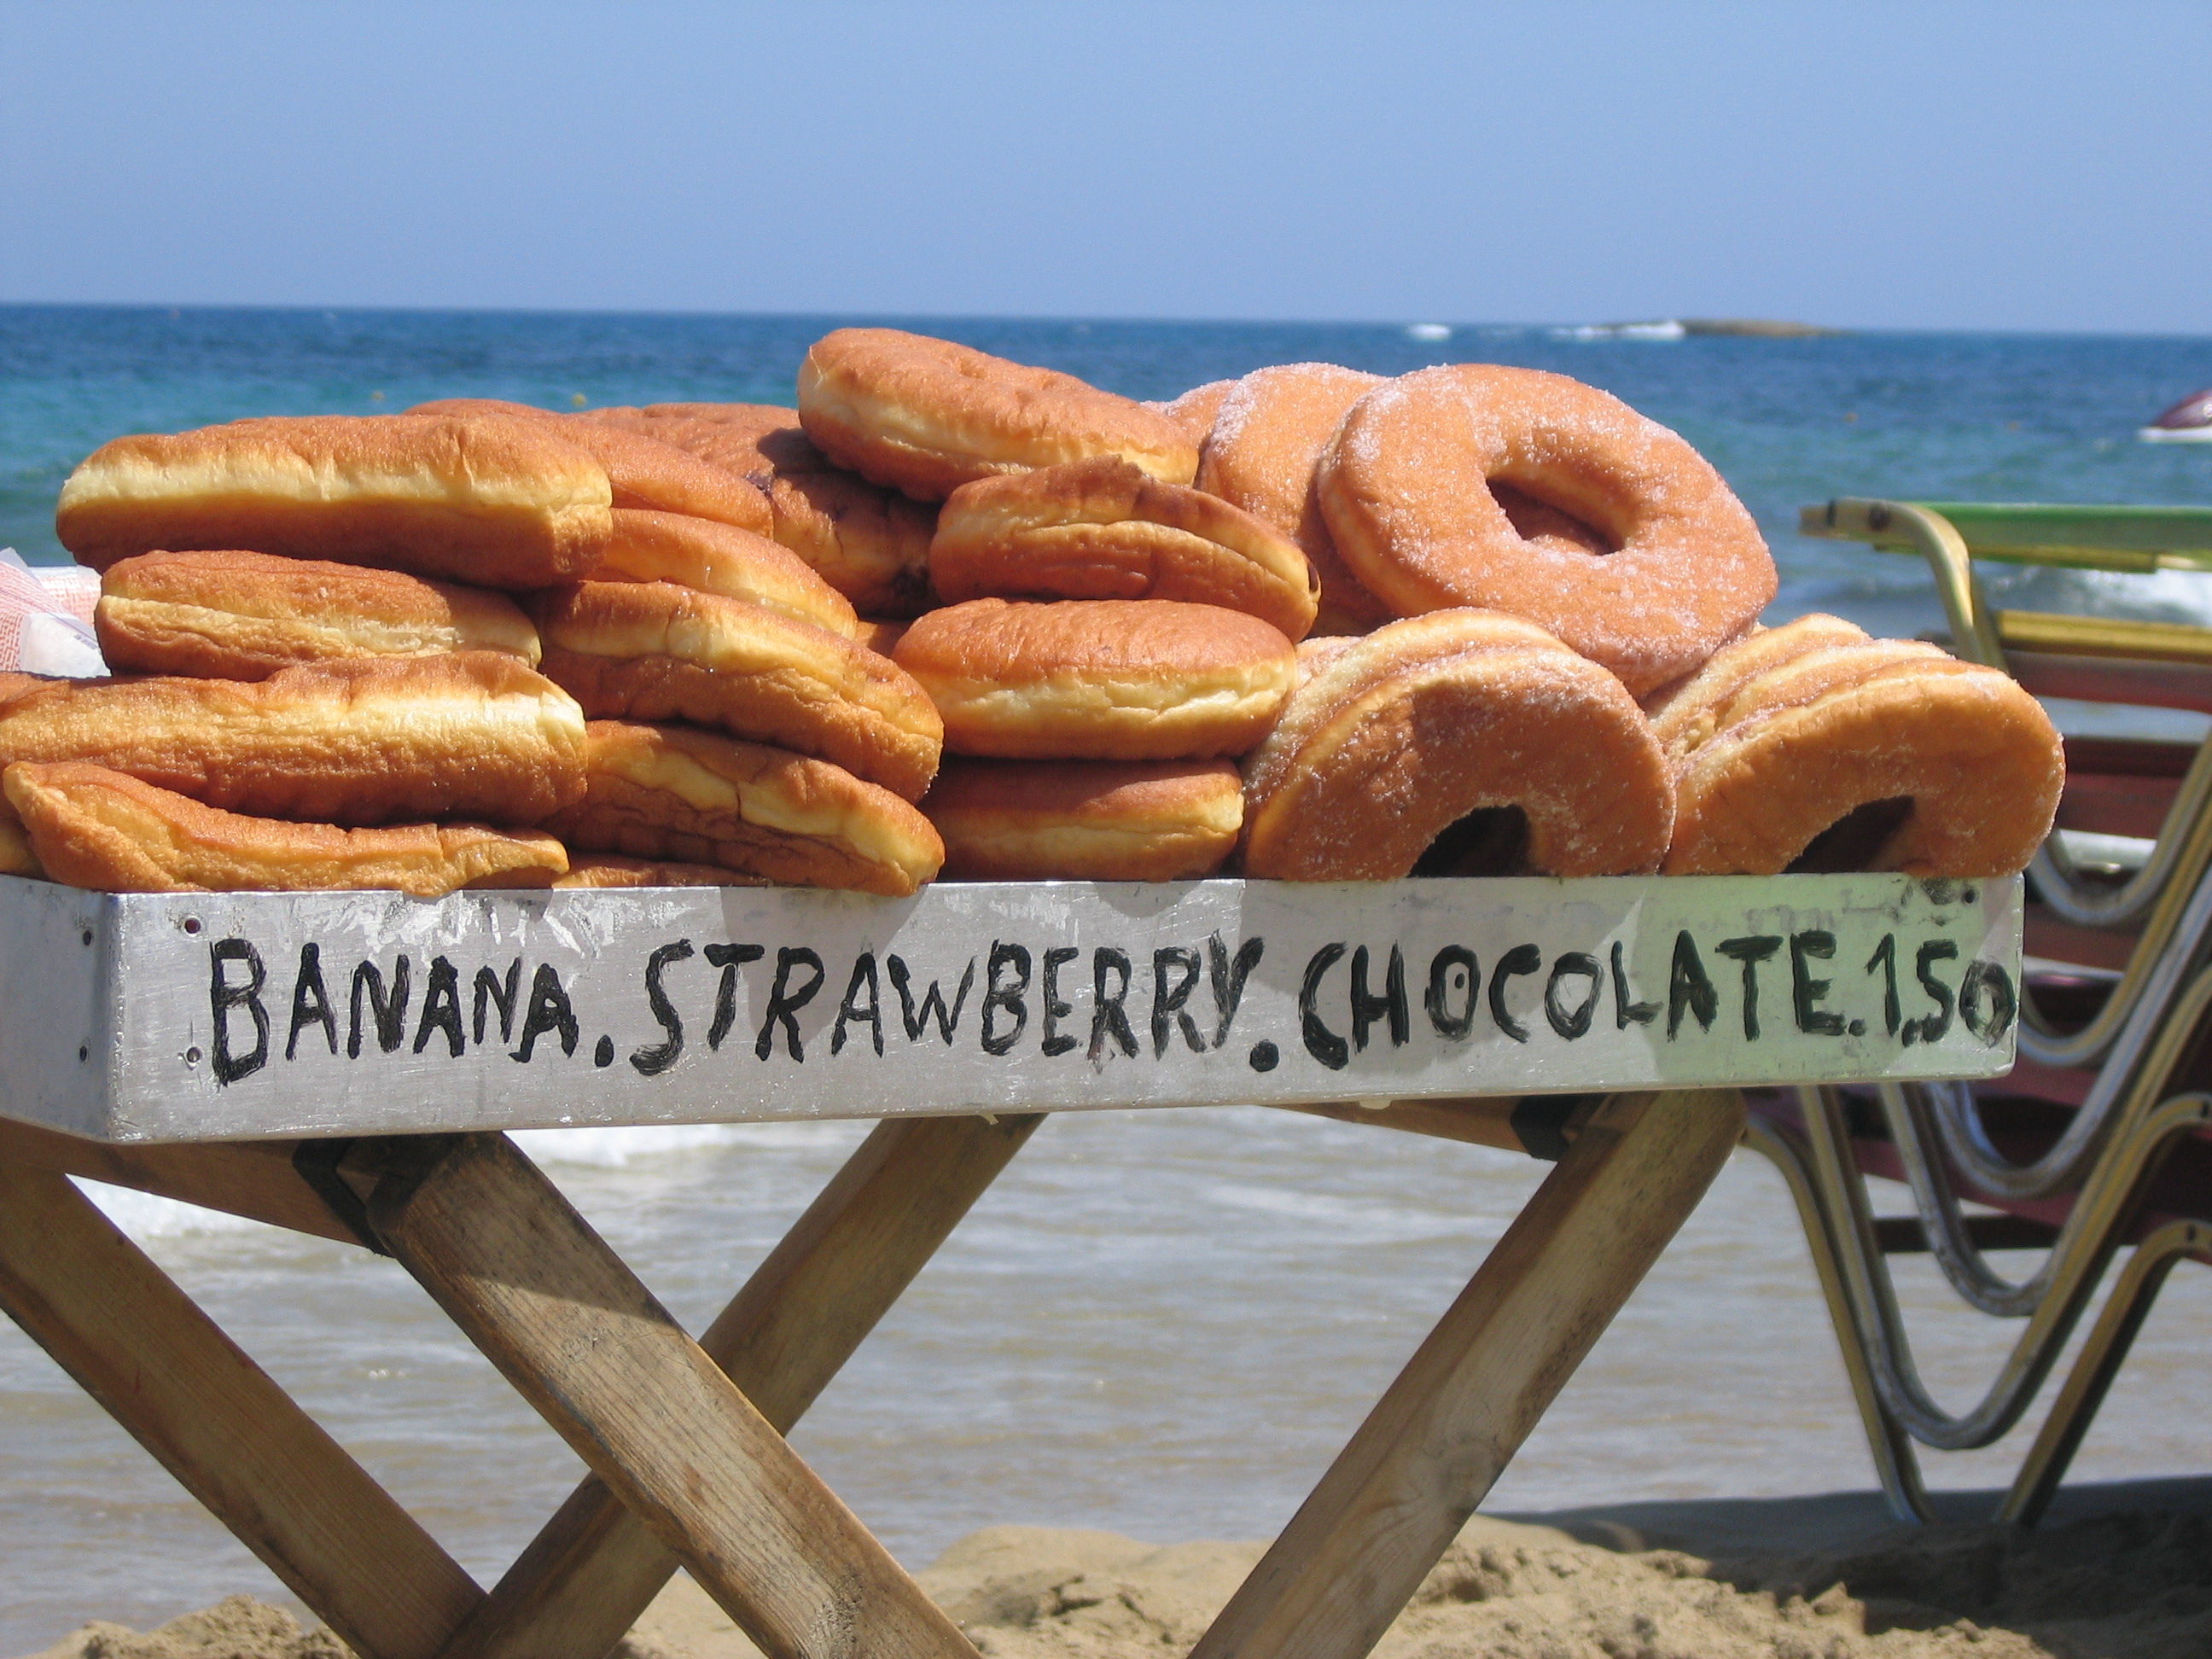 Sugary Donuts on the Beach